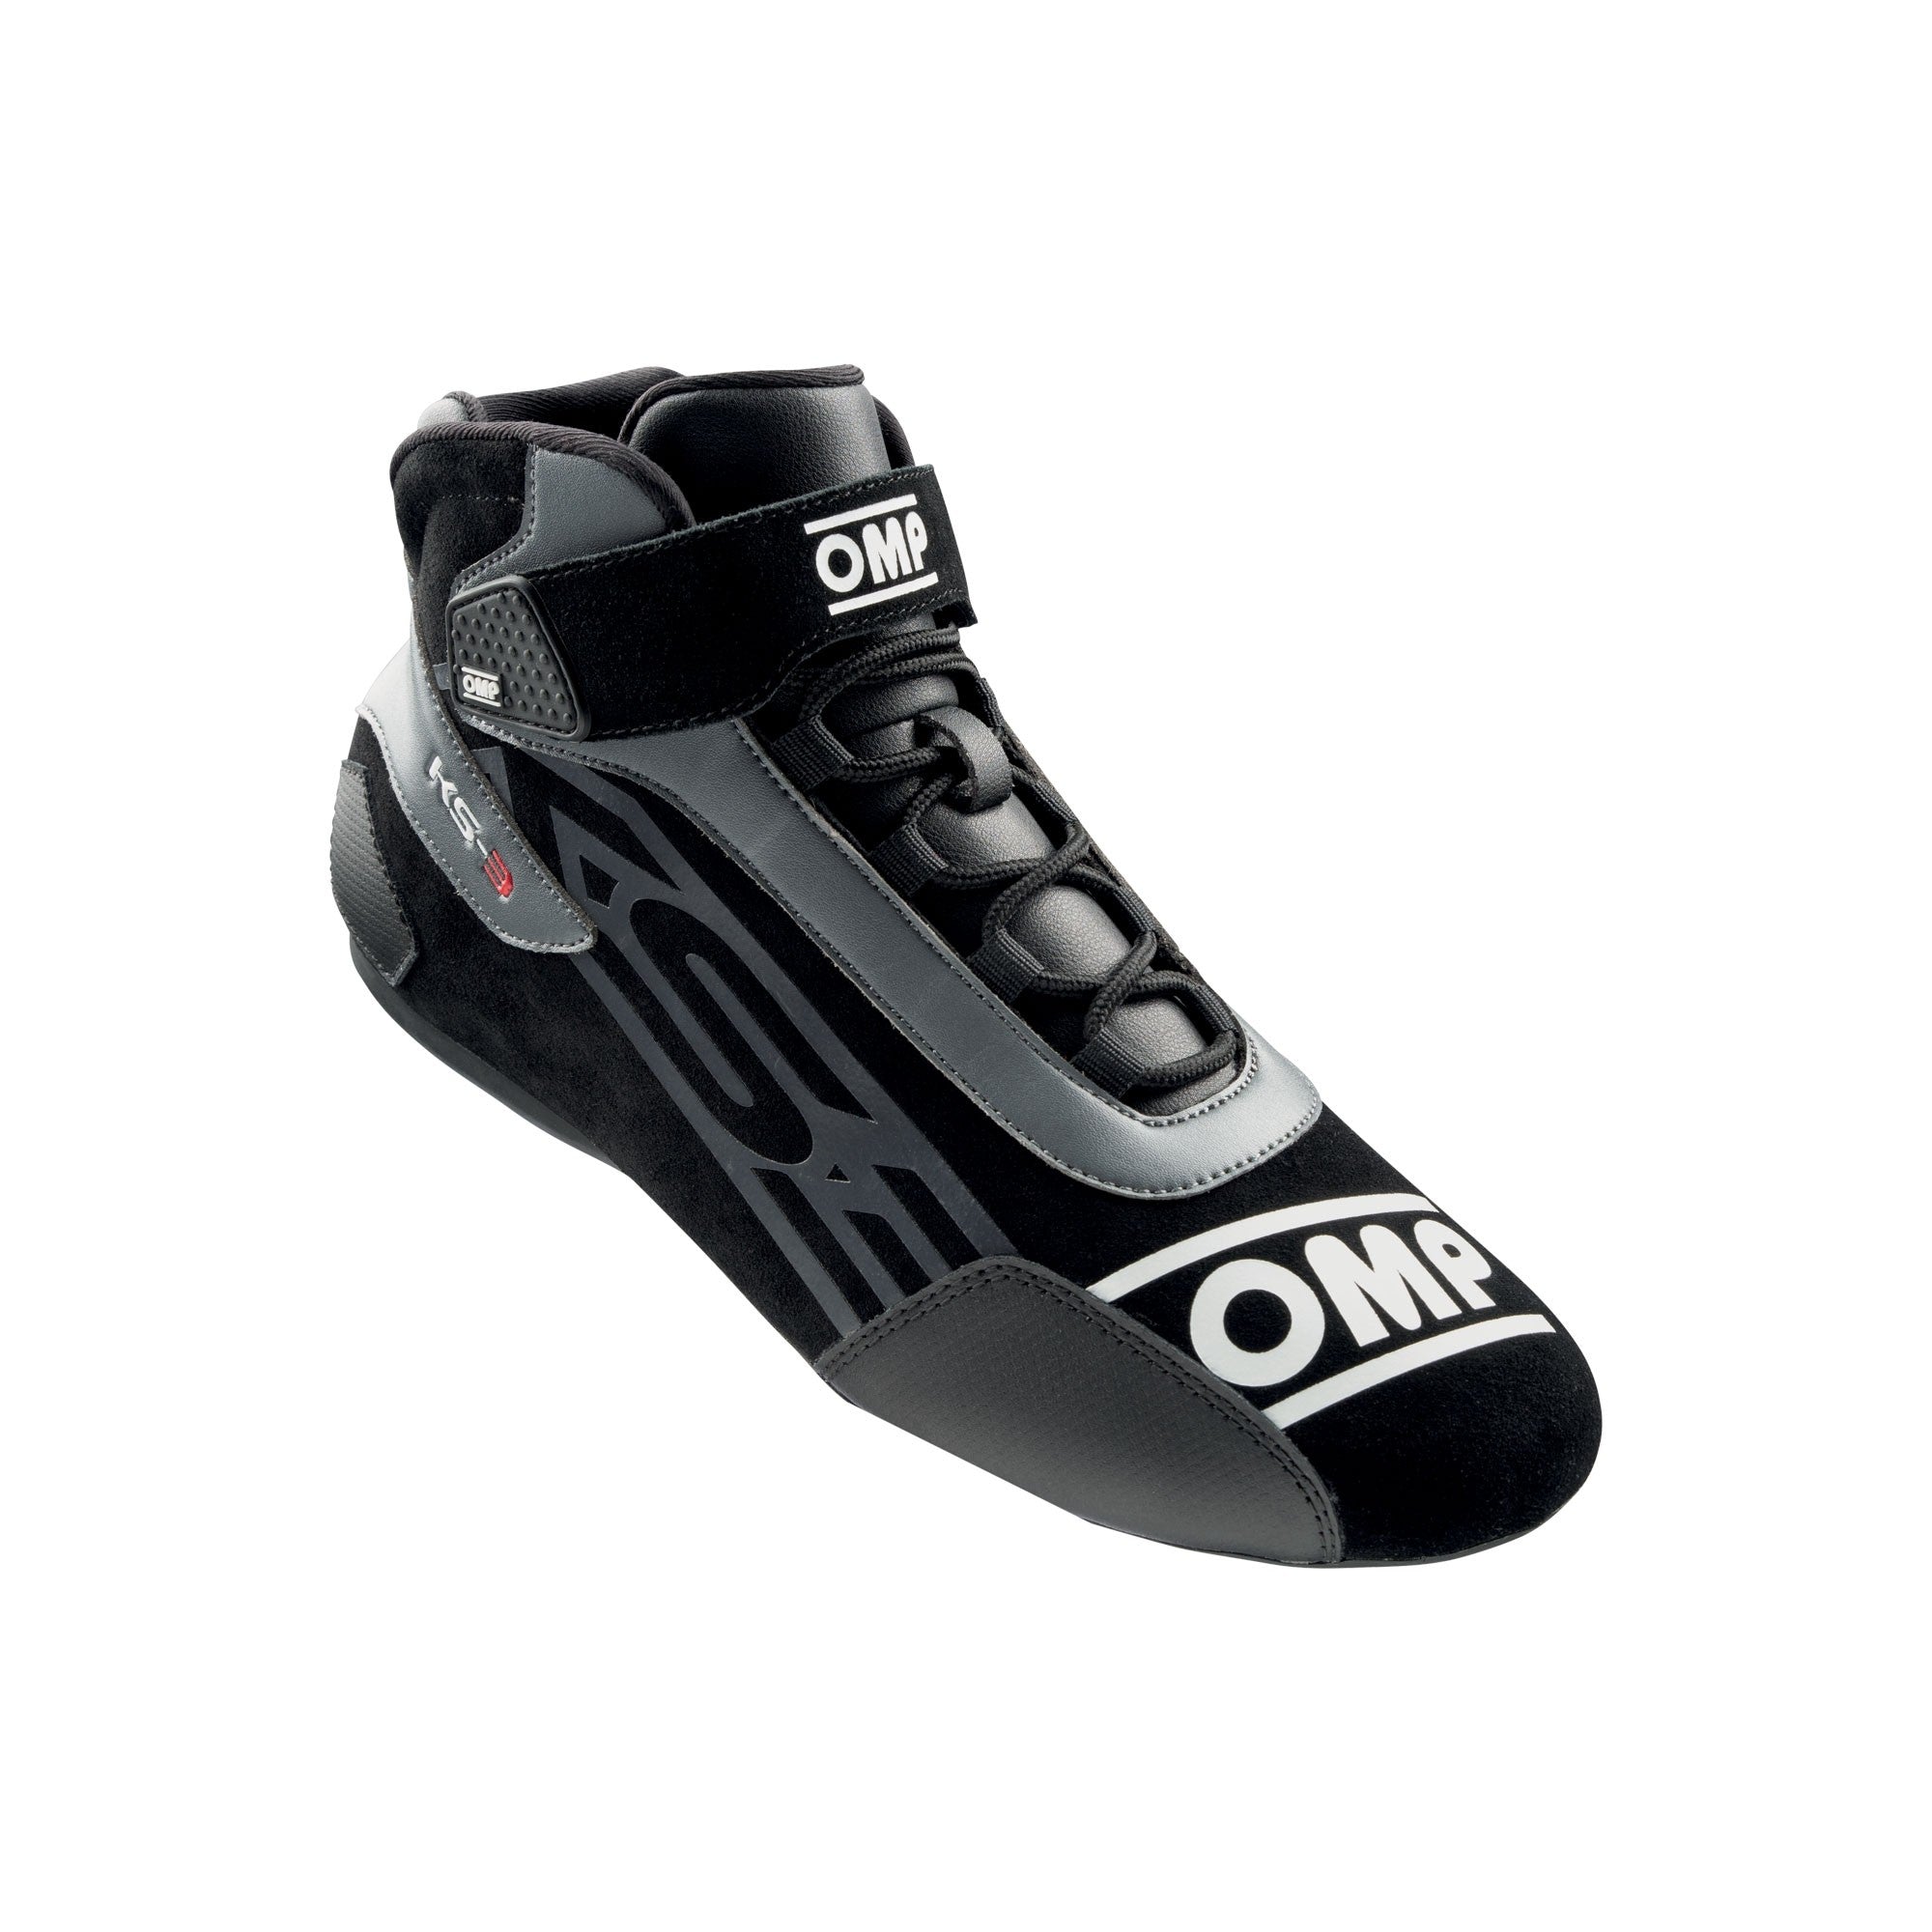 OMP | KS-3 Karting Shoes-Karting Shoes-OMP-gpx-store